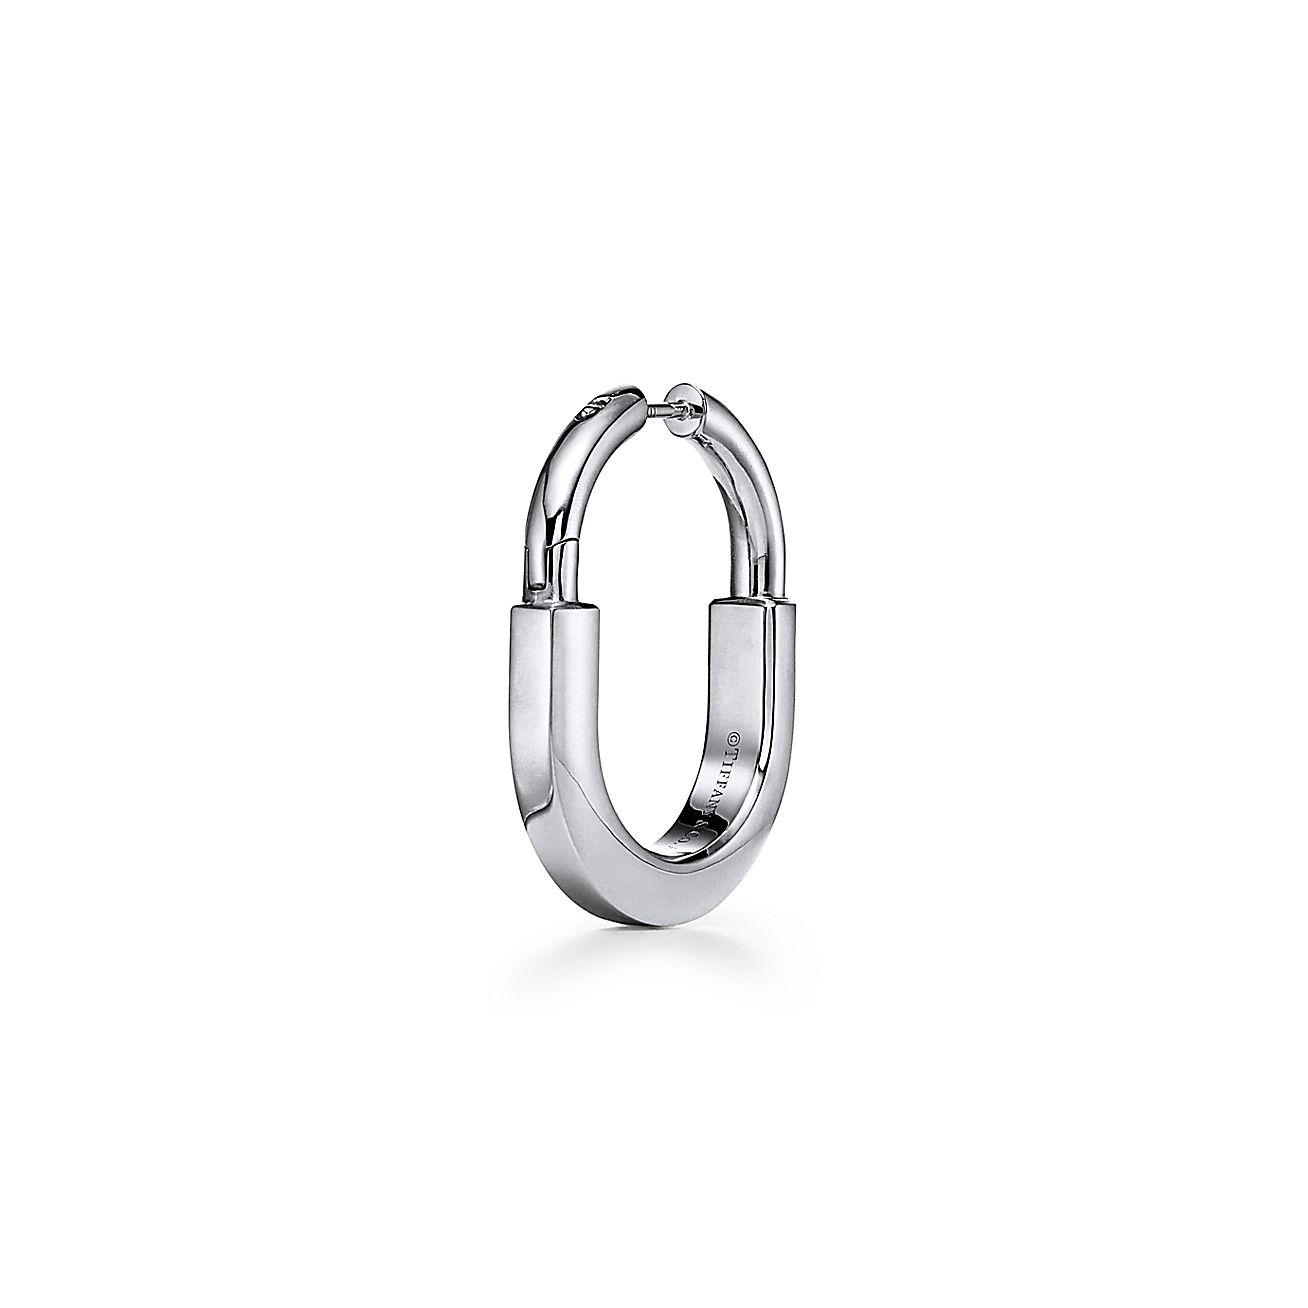 Tiffany Lock Earrings in White Gold with Diamonds